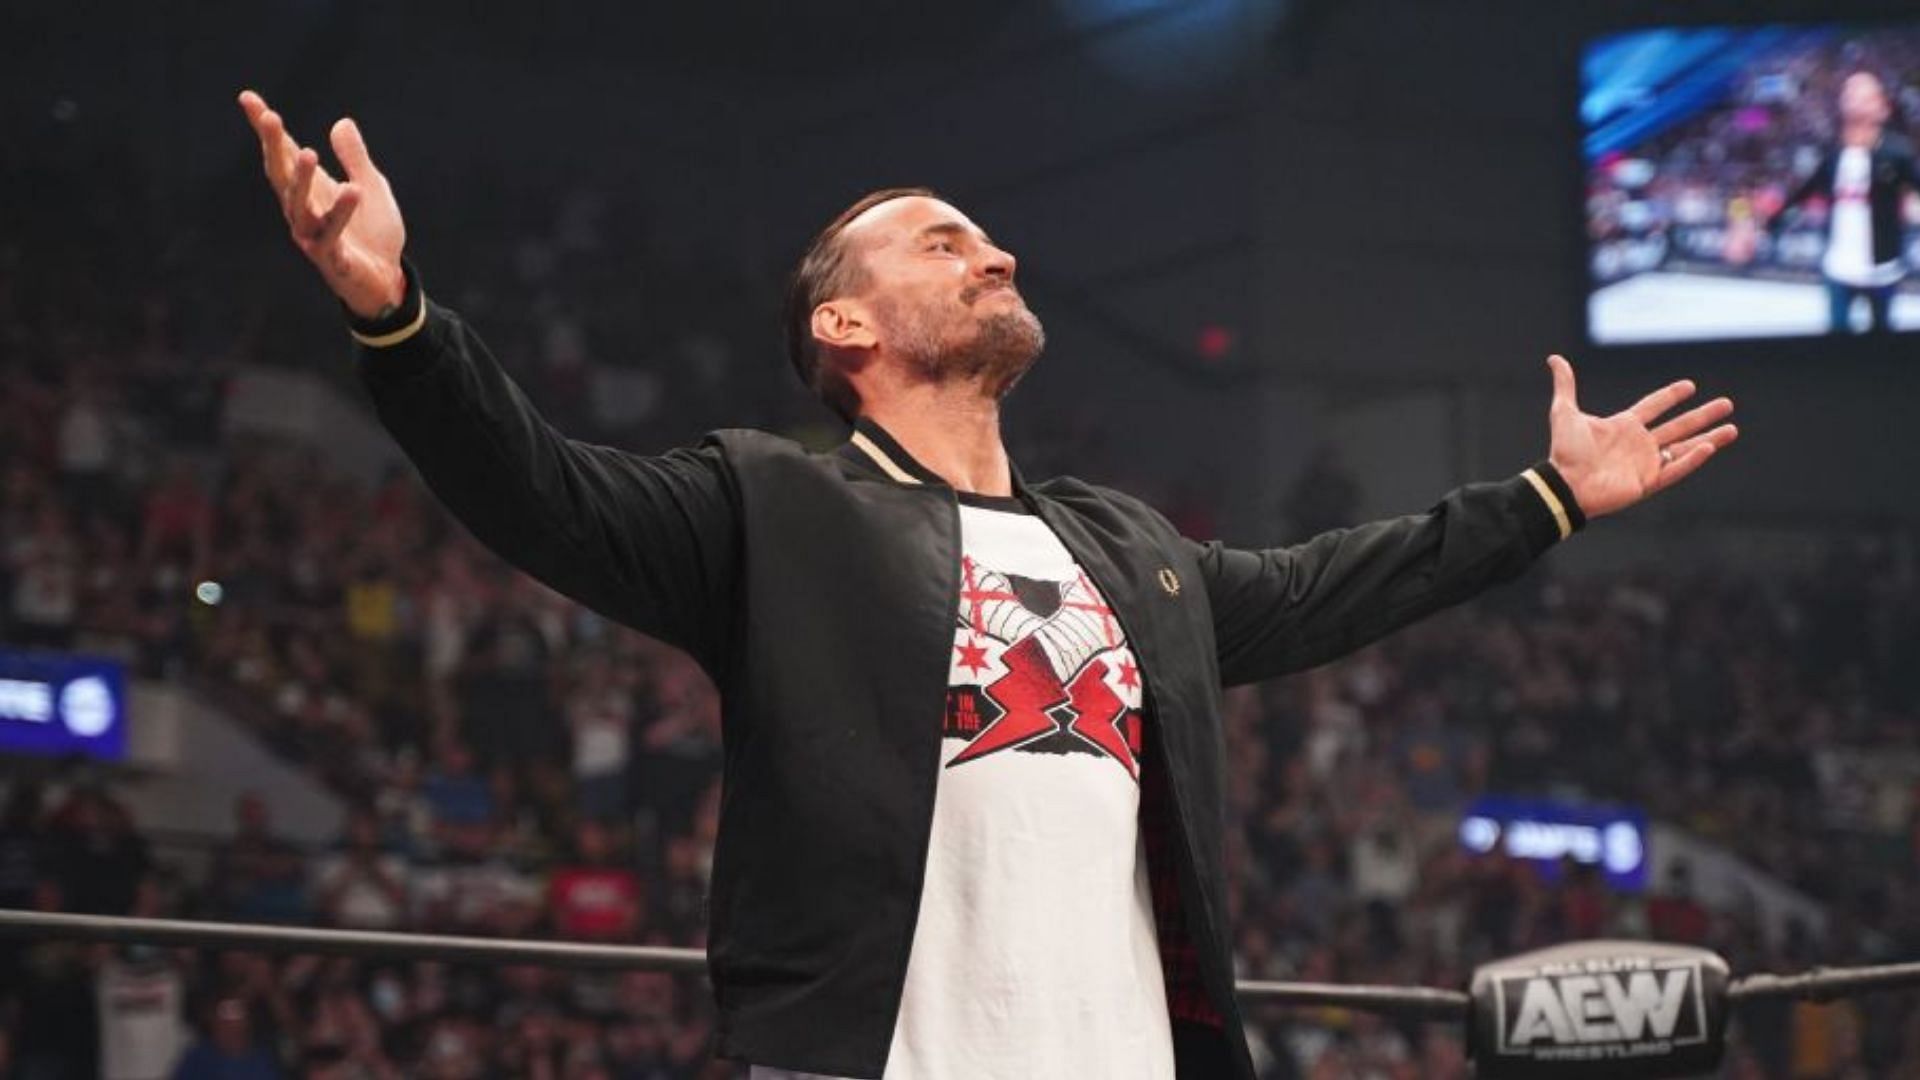 Will fans get to hear &quot;Cult of Personality&quot; blast through a wrestling arena tonight?